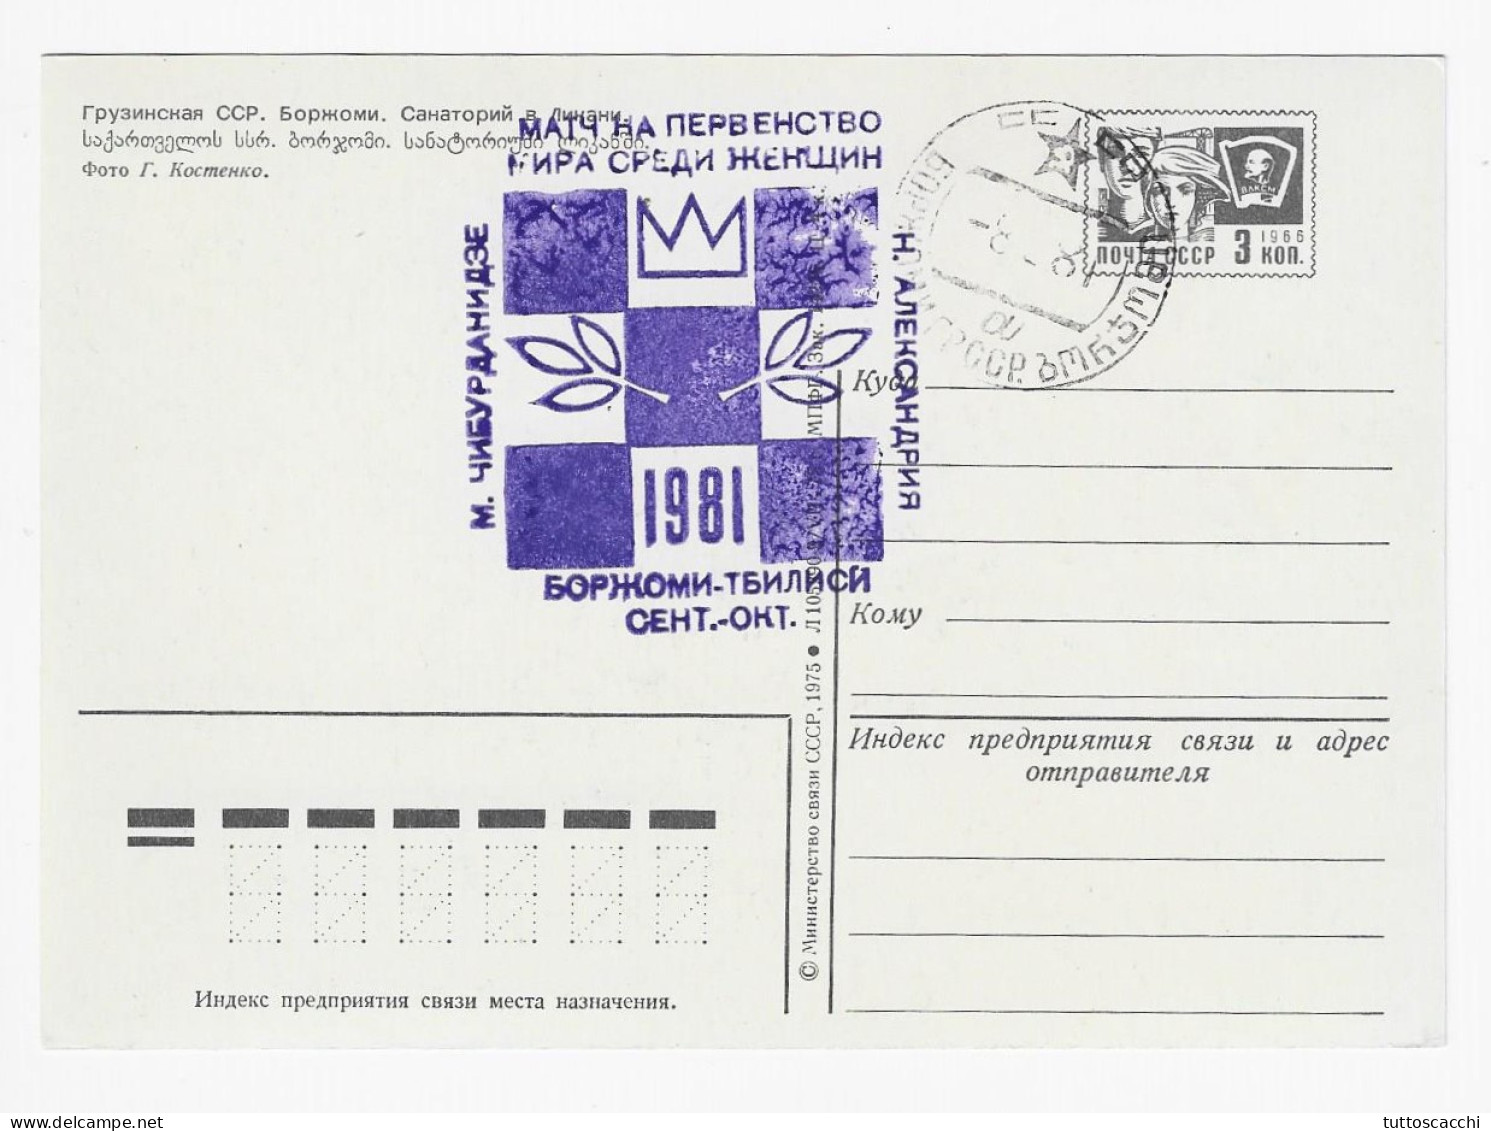 CHESS USSR 1981, Tbilisi - VIOLET Chess Cancel On Postcard - Chess